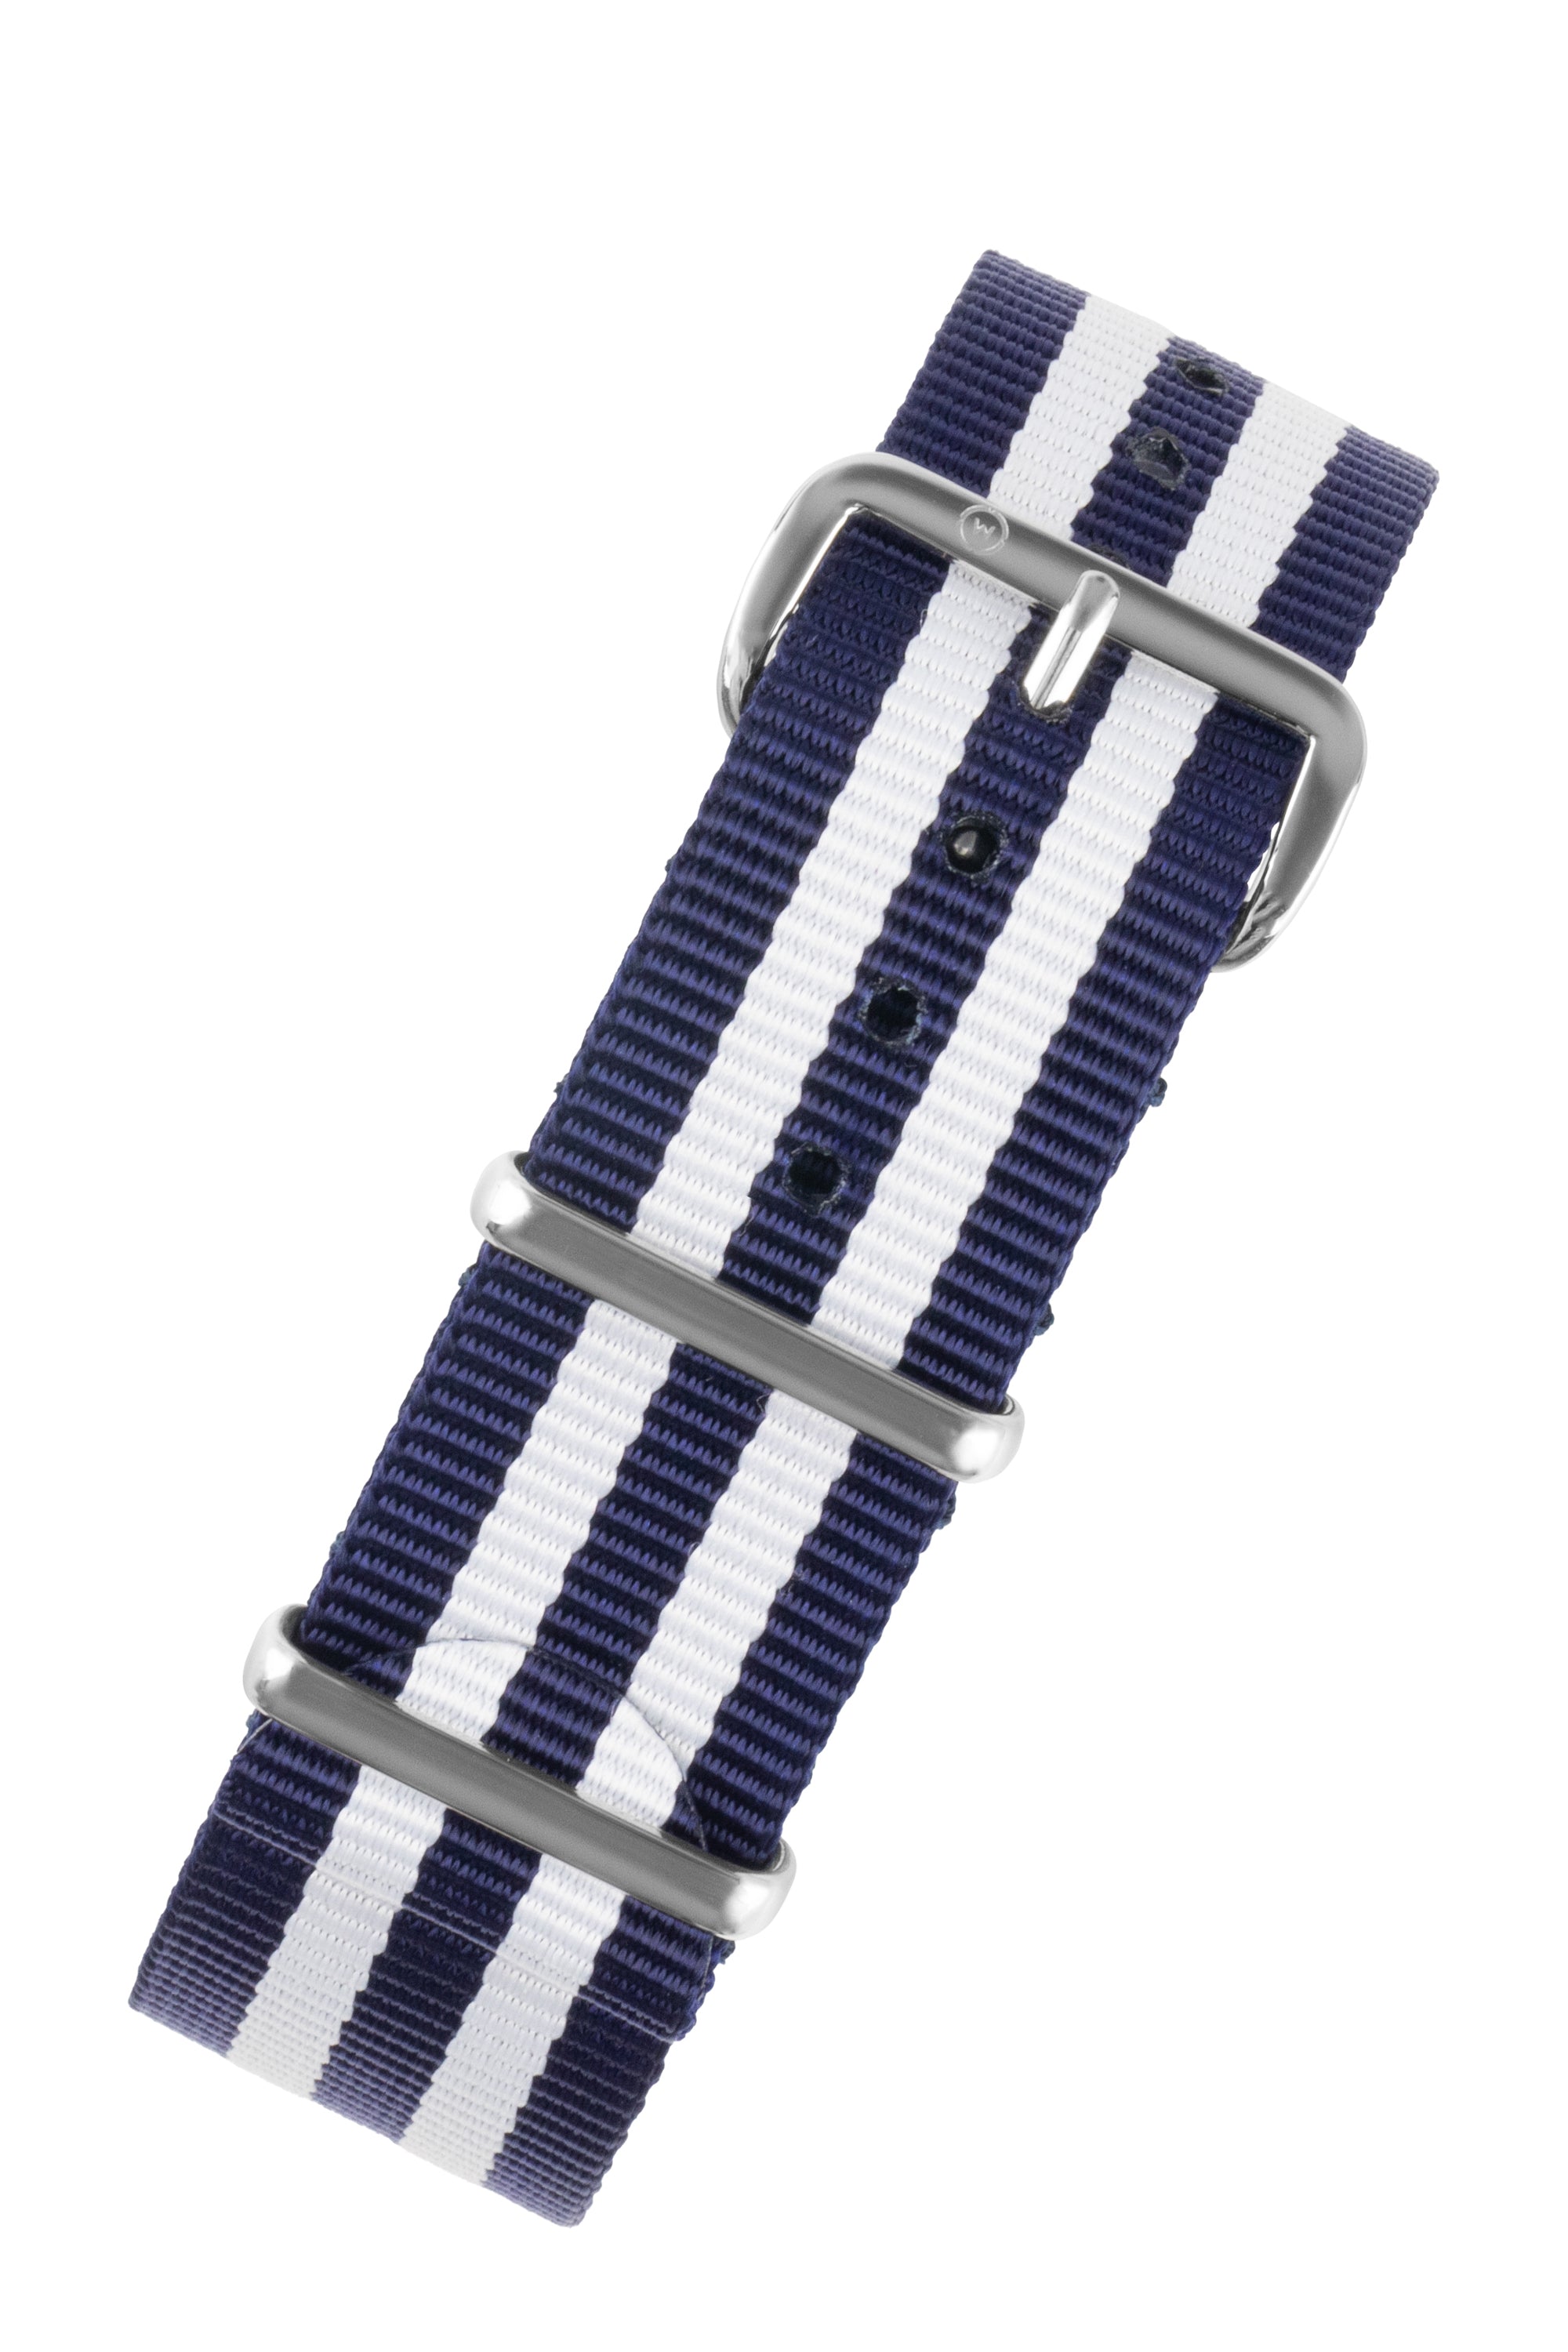 NATO Watch Straps in BLUE with WHITE Stripes | WatchObsession